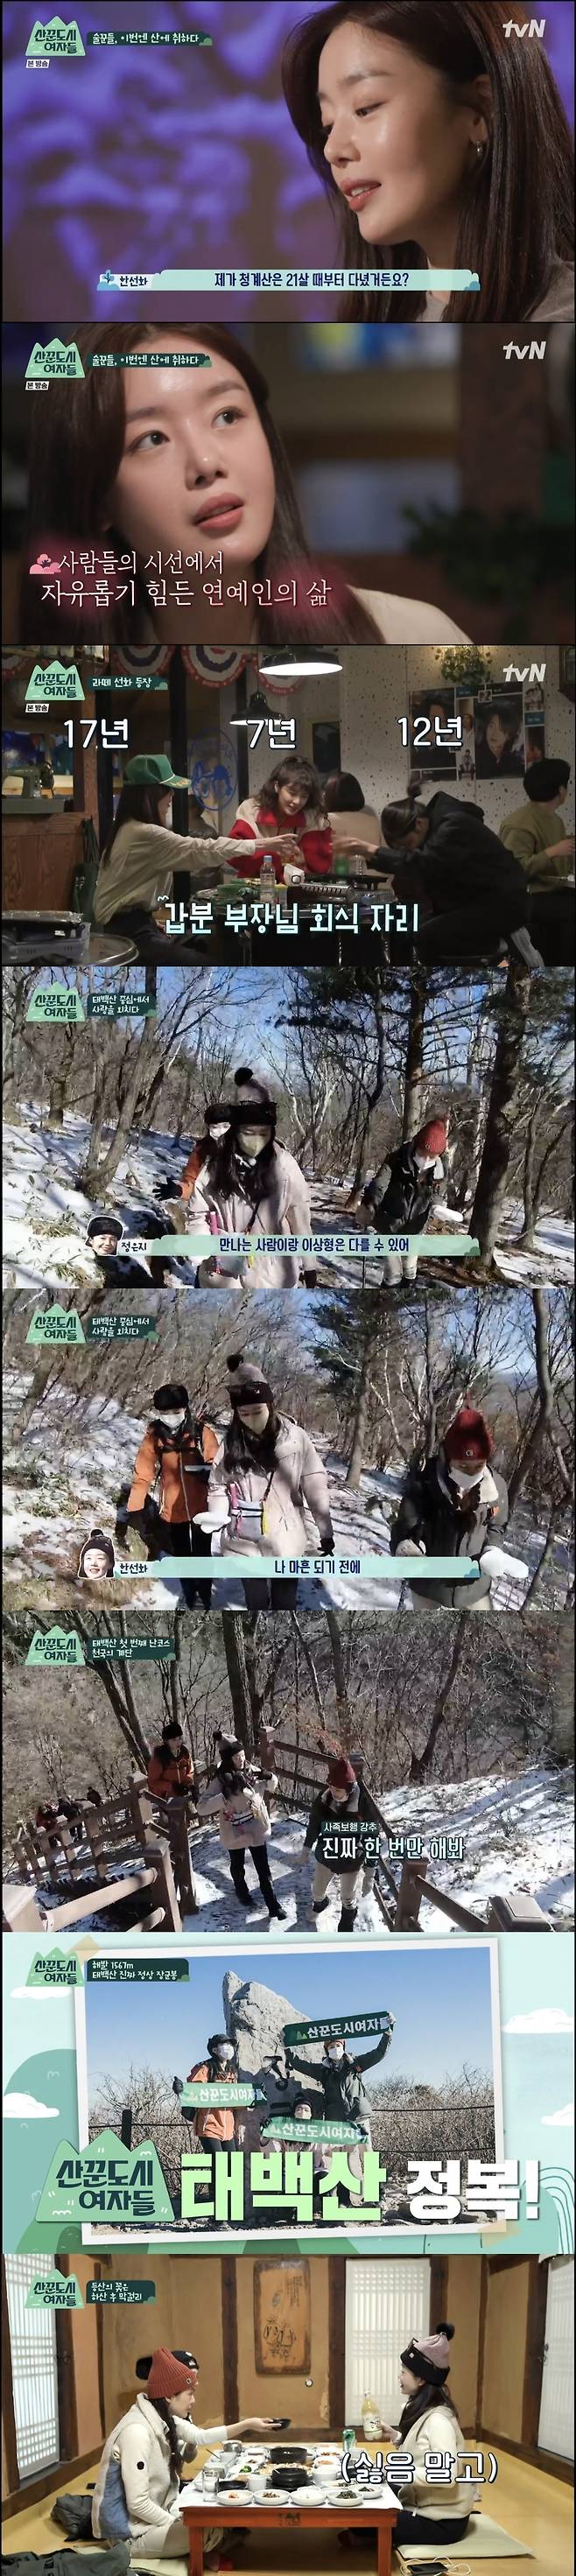 Han Sun-hwa, Jung Eun-ji and Lee Sun-bin succeeded in climbing Taebaeksan.On February 11, the TVN new entertainment program Sander City Women was first shown in the Strange City Women, which was the first mountain to climb the Taebaeksan.Han Sun-hwa, who met Jung Eun-ji and Lee Sun-bin earlier, said, Is this the sister who went to Hallasan this time?I recalled the situation at the time of the success of Hallasan Baekrokdam climbing last December.Han Sun-hwa said, I really can not see my sister, but I was going to cry. It was too fast.I was going to the shelter alone, and I couldnt see the weather that day, so it was a fog.I went to the bathroom and asked if I was going up alone. Lee Sun-bin said, I did, but Im leaving me? Jung Eun-ji said, I will abandon you even though I was saddened by my own.Taebaeksan was more than usual with a cold-weather warning of minus 17 degrees.Before climbing, the three stopped by a convenience store to buy the necessary items, and Han Sun-hwa pointed out that Lees bag was too heavy.The highest peak of the Taebaeksan climbing the Baekdudaegan ridge is the general peak.Starting with a gentle dirt road, passing through the ice valley frozen in the cold, a dense forest road full of phytoncide, and climbing the steep stairs that unfold endlessly in front of you, reveals the superb view of Mangyeongdae located on the silver ridge.If you go through the crossroads of Ma, which tests the patience of hikers, you will reach the highest peak of Taebaeksan, which is 1567m above sea level.The three tired people took a break and shared snacks while climbing. Lee Sun-bin was surprised by the minus 17-degree cold that freezes sausages to sausages, saying, Source is ice cream.Jung Eun-ji said, I took off the mask for a while, but it was frozen. It was originally soft material. Han Sun-hwa said, Im resting now.I woke up, he said.Jung Eun-ji watched Han Sun-hwa ahead and joked, What kind of master is she walking like?Han Sun-hwa, who went up first, left Jung Eun-ji and Lee Sun-bin names on Sulsan, and Jung Eun-ji, who found it, laughed, saying, Its cute.Jung Eun-ji said, I have not climbed a lot, but when I suddenly heard my head without thinking, I said, Im here as much as this. Its cool.When PD said, I do not have a point of view, Lee Sun-bin said, Every person has a Babyface. I have to enjoy my leisure and rest and go up.Jung Eun-ji then teased Lee Sun-bin, saying, When Sun Bina arrives at the summit, its DM year. Han Sun-hwa said, Its going to each Babyface.When I walk, I meet you. In the end, Lee Sun-bin continued his climb by walking to the family.Han Sun-hwa enjoyed the beautiful Taebaeksan scenery, revealing the wind that I want to come to someone I love later in this place: Jung Eun-ji said, Do not we love?, and Han Sun-hwa replied, I love you.Lee Sun-bin, who is in public love with Lee Kwang-soo, said, Can I answer?I cant answer, Settai said, while Jung Eun-ji added, there may be an ideal, though, and the person you meet and the ideal may be different.Then Lee Sun-bin said, But it is quite a (good) right, revealing his affection for his lover Lee Kwang-soo, and Han Sun-hwa said, Why do you ask such a funny question?Do it to me, Im thrilled, said Settai jealous. Jung Eun-ji, Is there a time when you want to get married by this point?I had all my friends, Han Sun-hwa said, I just got three letters before I was forty, but I have not got four letters yet.The three of them went to the top after eating the ramen noodles safely, and they came to the top of the day, and they came to the scene by drinking makgeolli at traditional restaurants.Han Sun-hwa said, I thought I should take a few dresses and take a picture. Jung Eun-ji and Lee Sun-bin said, I have red faces., and responded with Settai; Lee said, It was like a tree in Harry Potter, and Jung Eun-ji said, I could think about life.